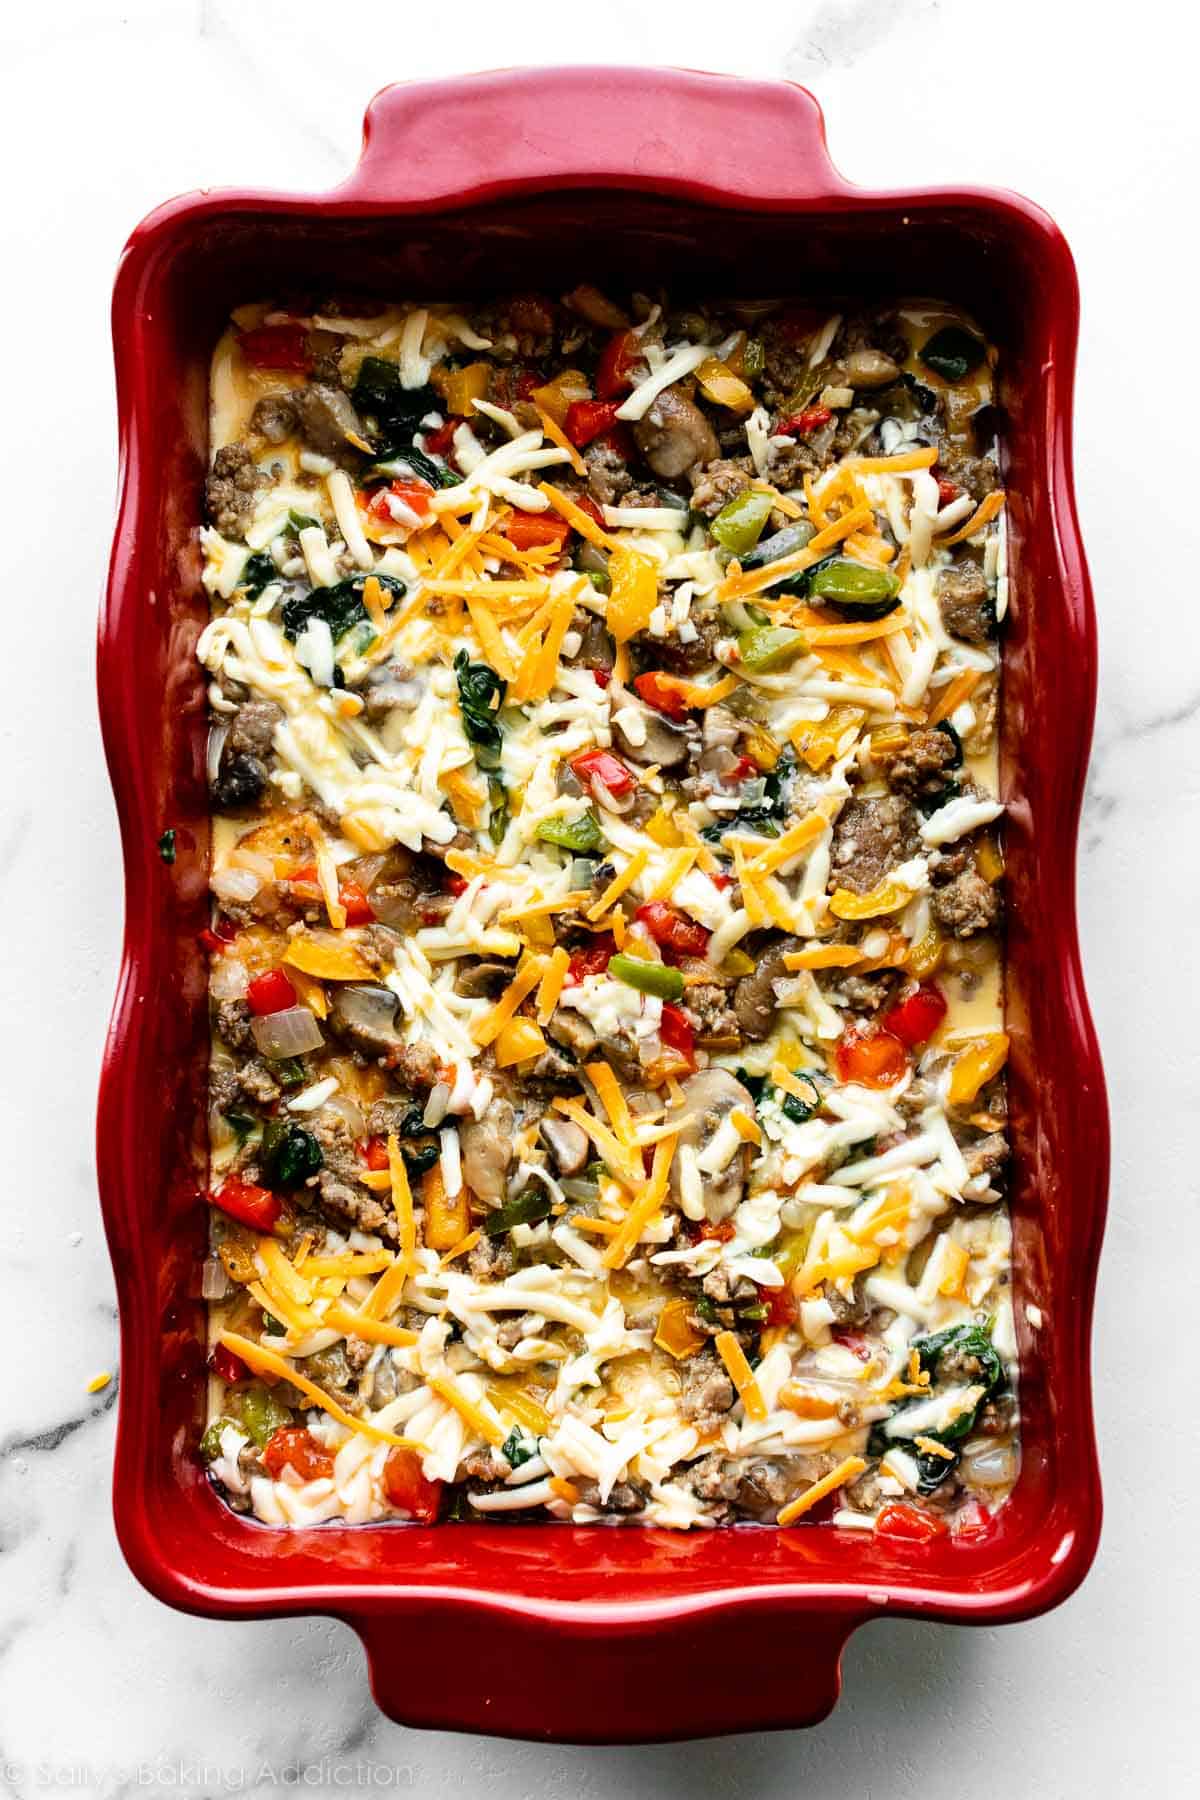 egg, vegetables, cheese, sausage, and bread combination in casserole dish on marble counter.